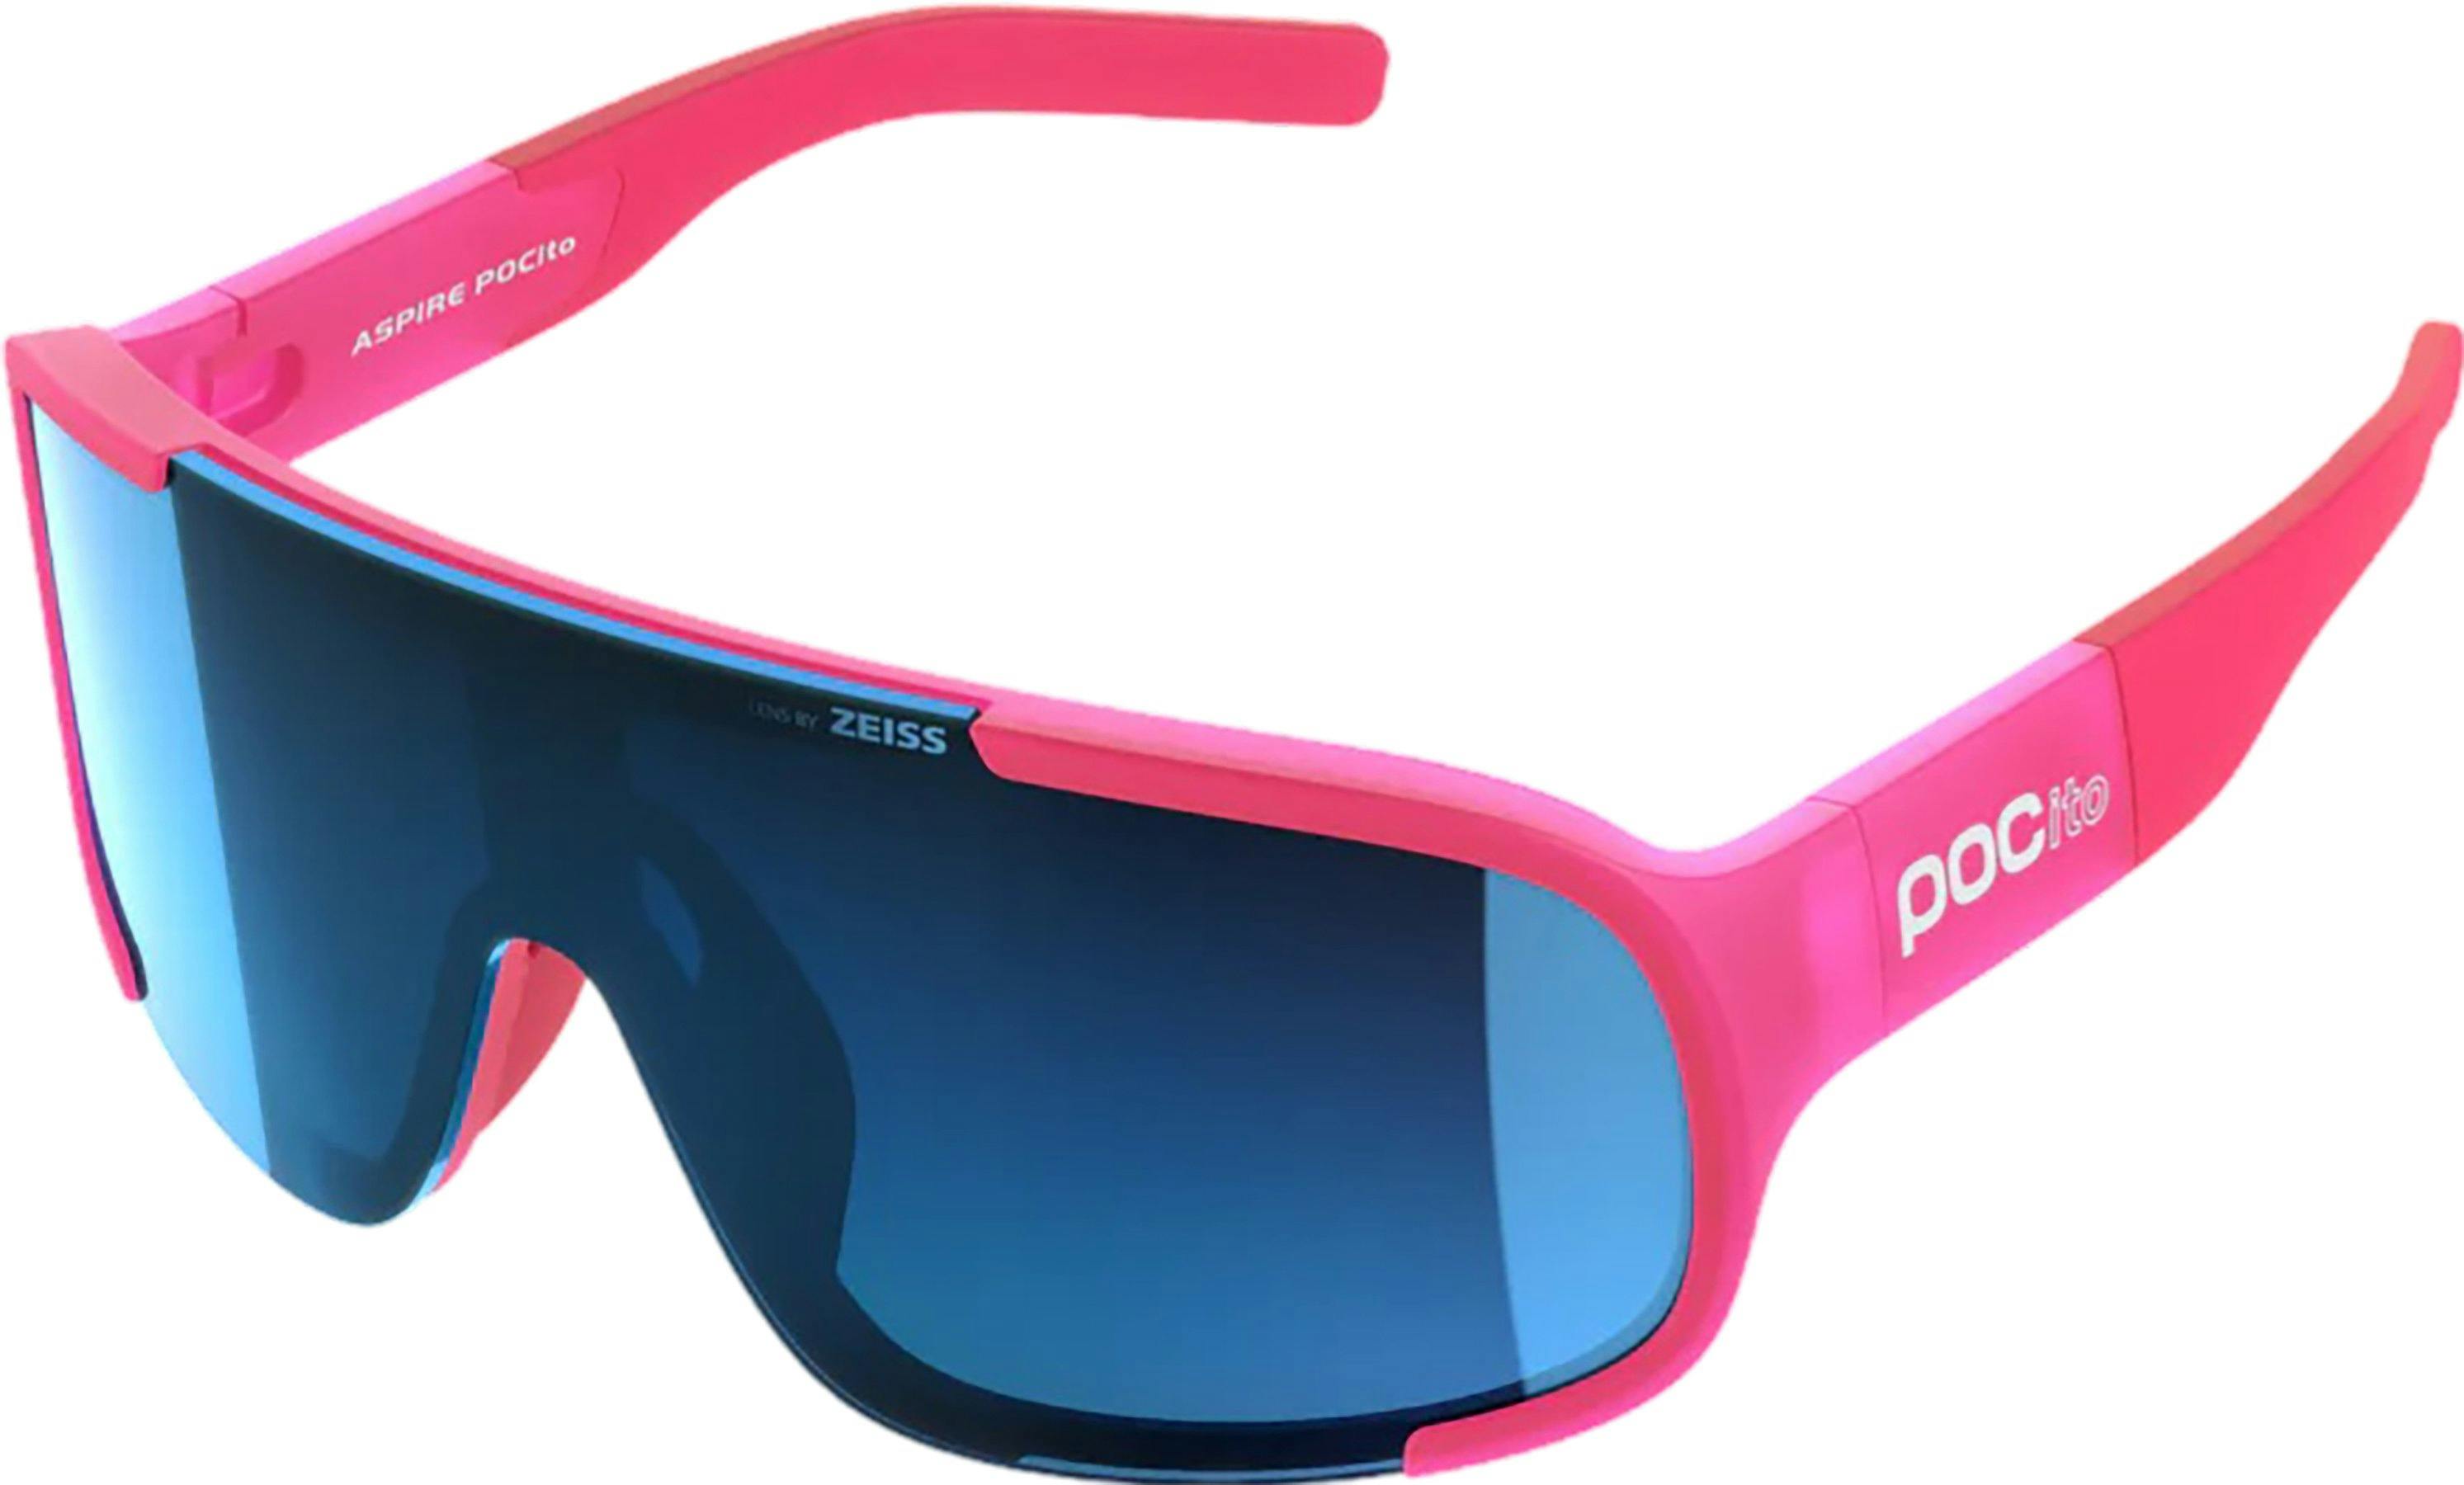 Product image for Aspire POCito Sunglasses - Kids